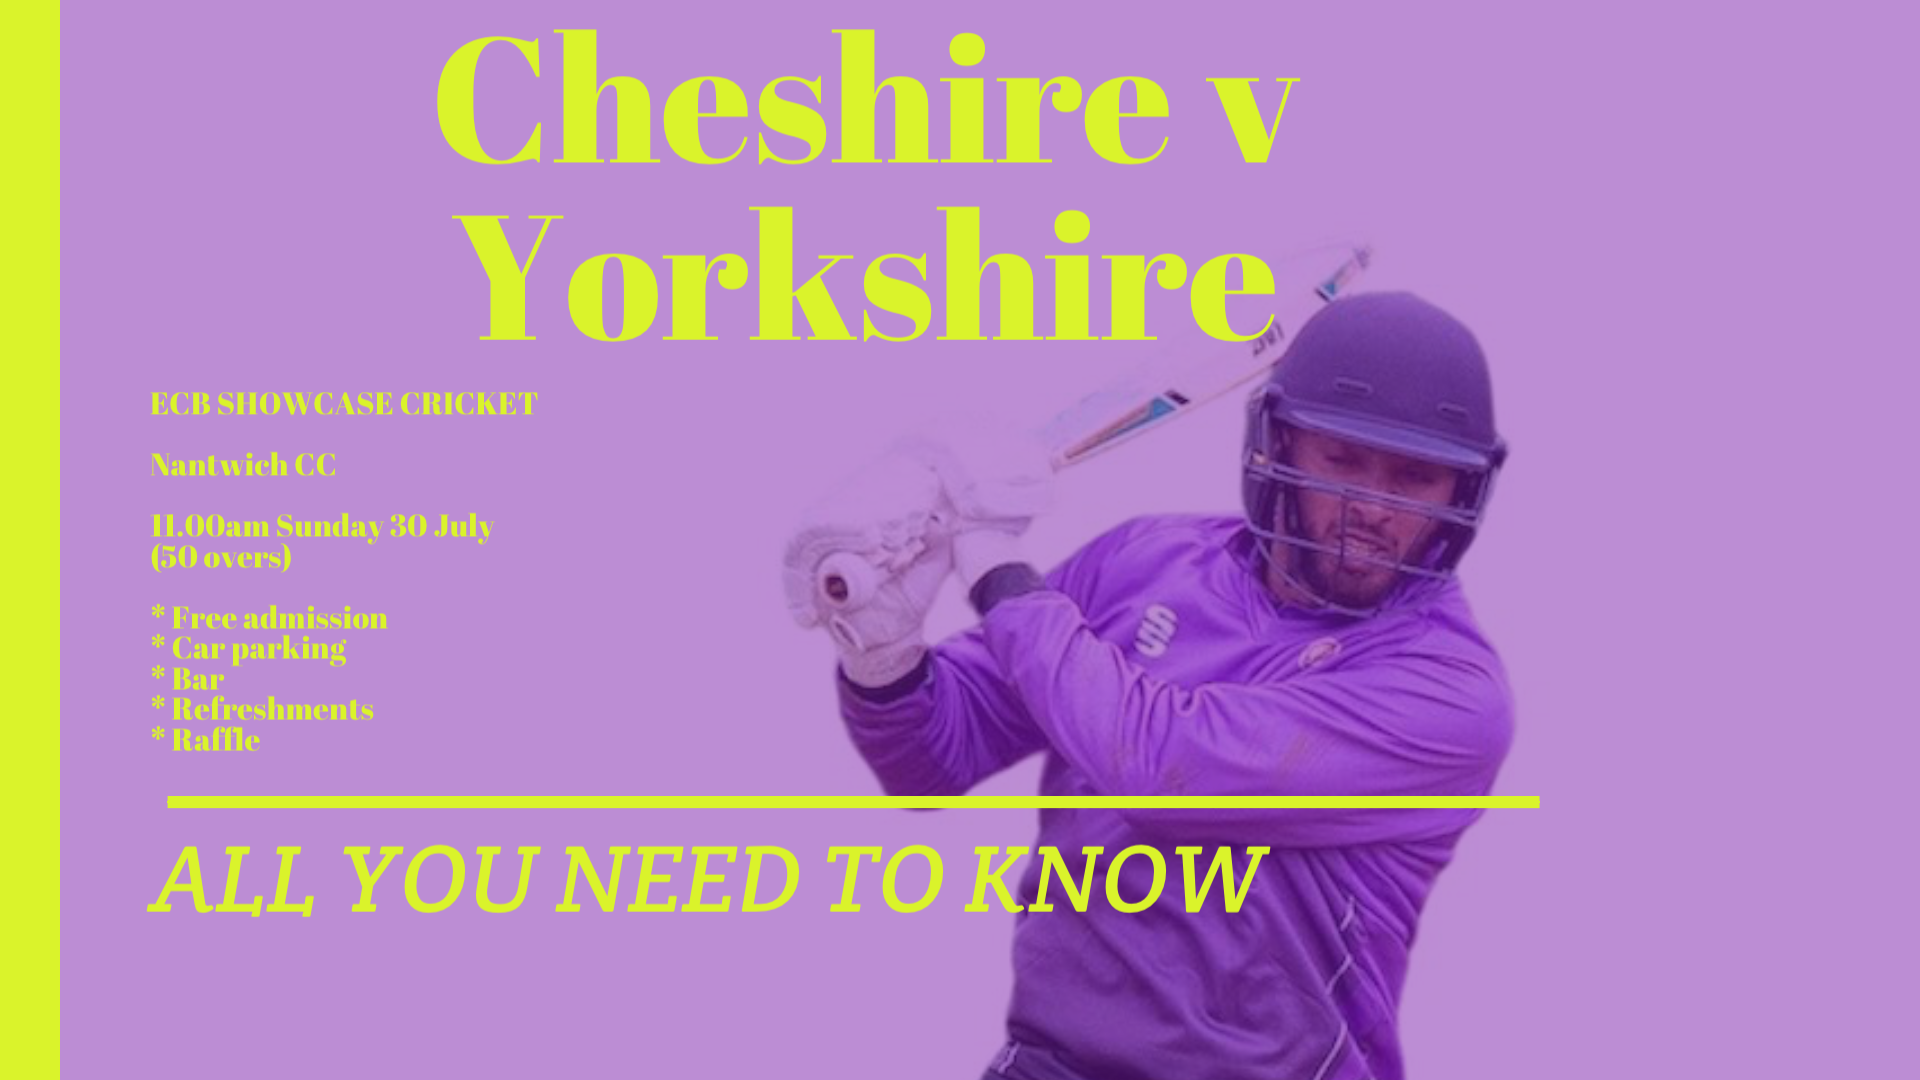 Cheshire v Yorkshire, Sunday 30 July - ALL YOU NEED TO NOW